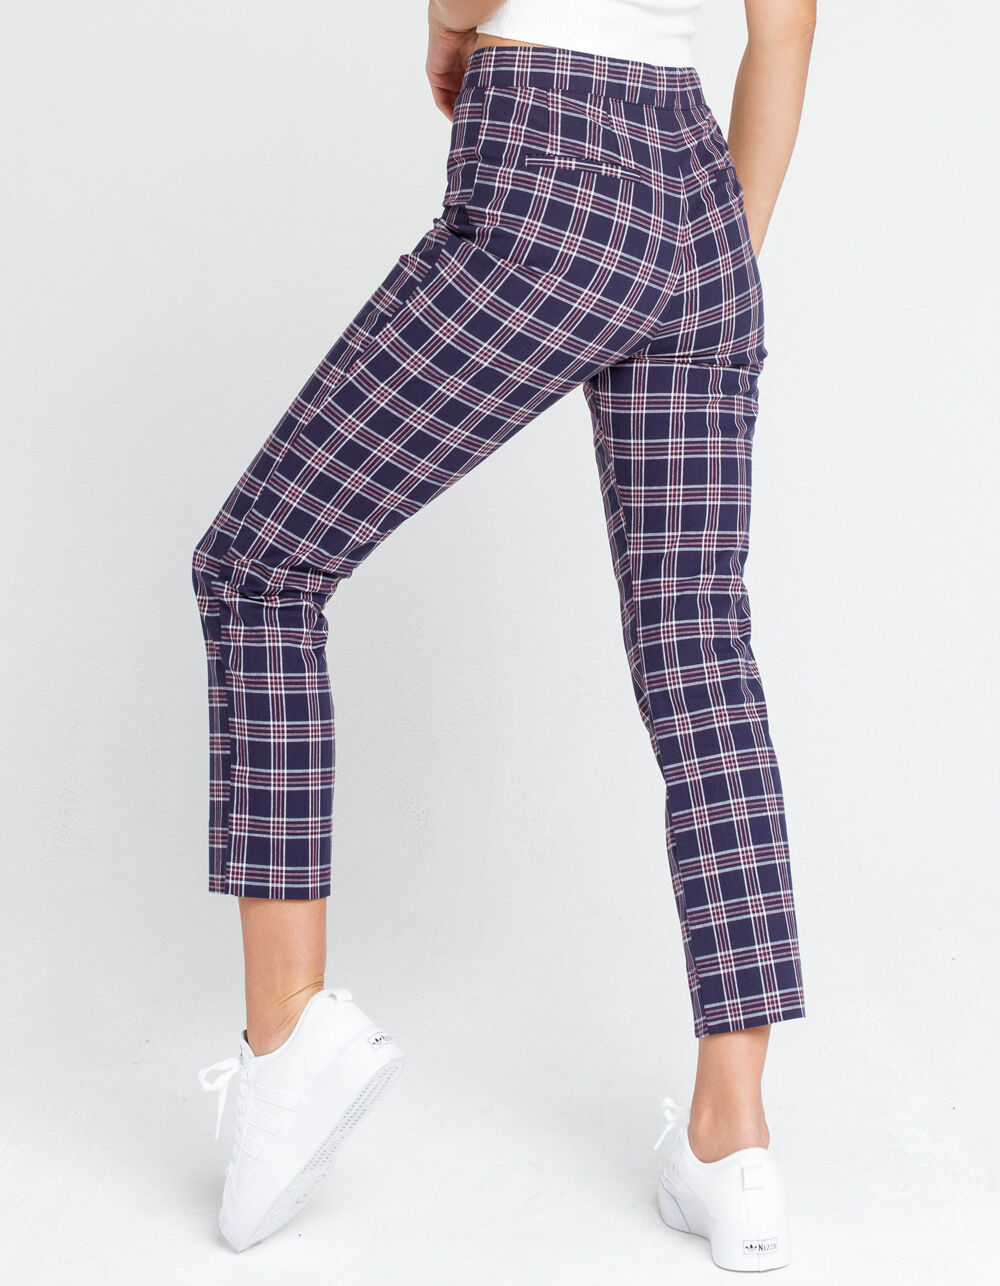 SKY AND SPARROW Plaid Womens Navy Pants - NAVY COMBO | Tillys